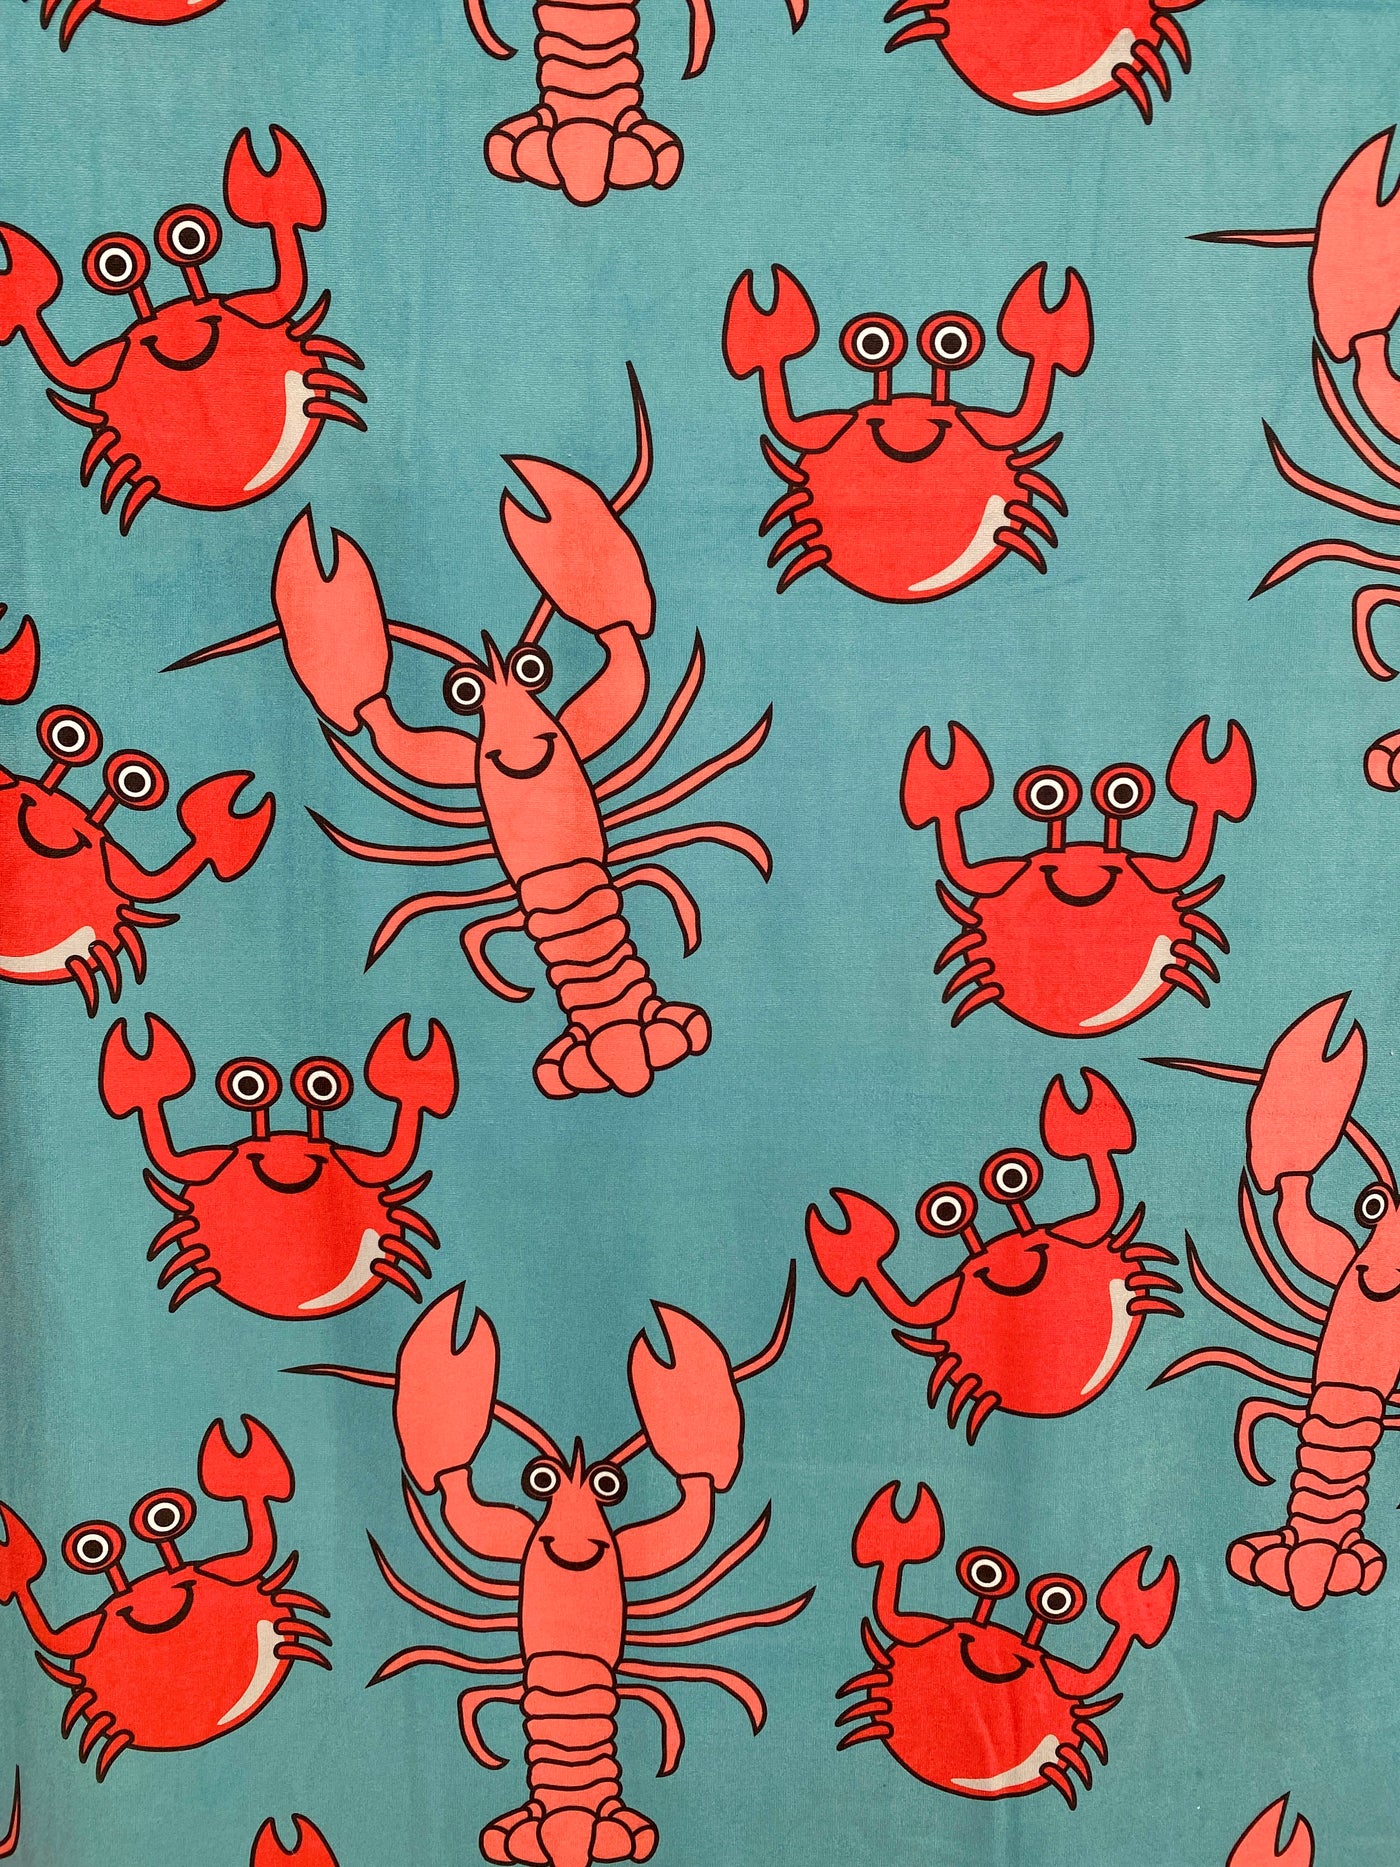 Hooded Kid Towel (18 months to 5 years): Lobsters and crabs